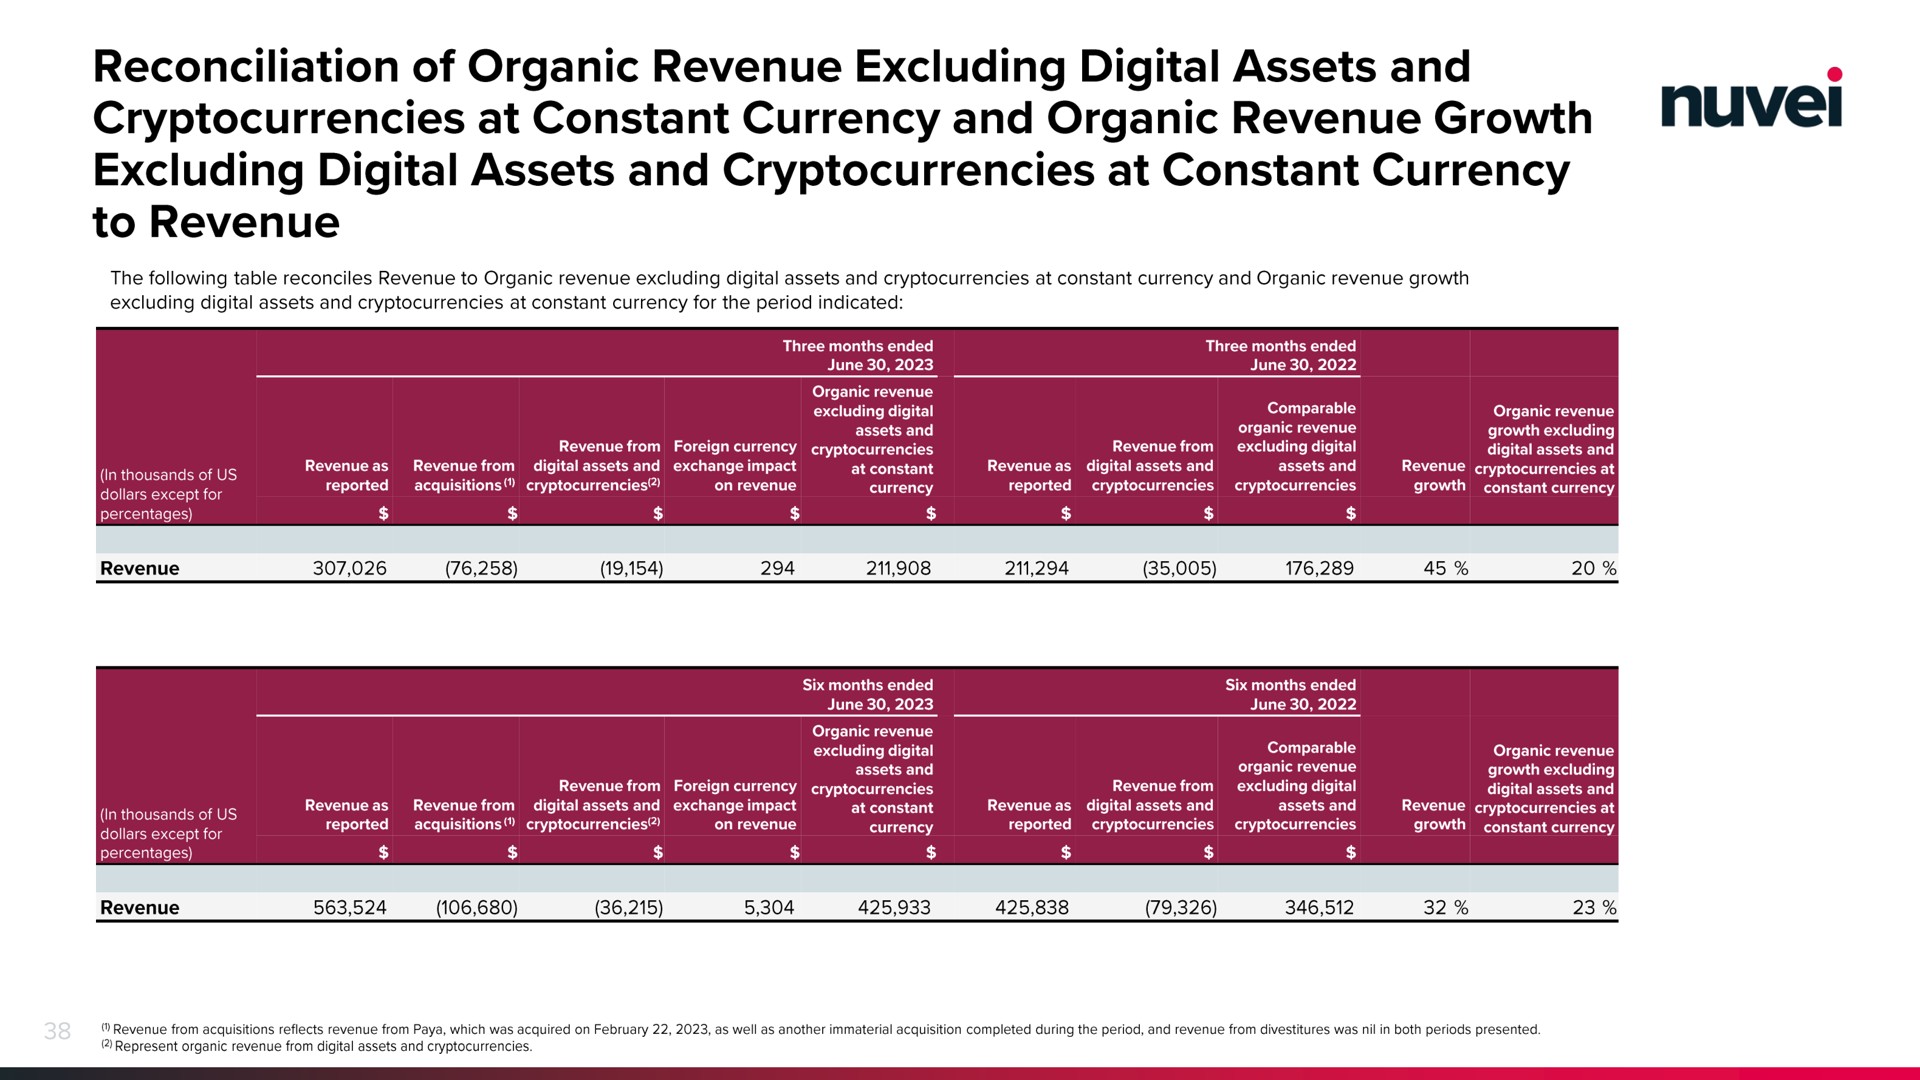 reconciliation of organic revenue excluding digital assets and at constant currency and organic revenue growth excluding digital assets and at constant currency to revenue | Nuvei